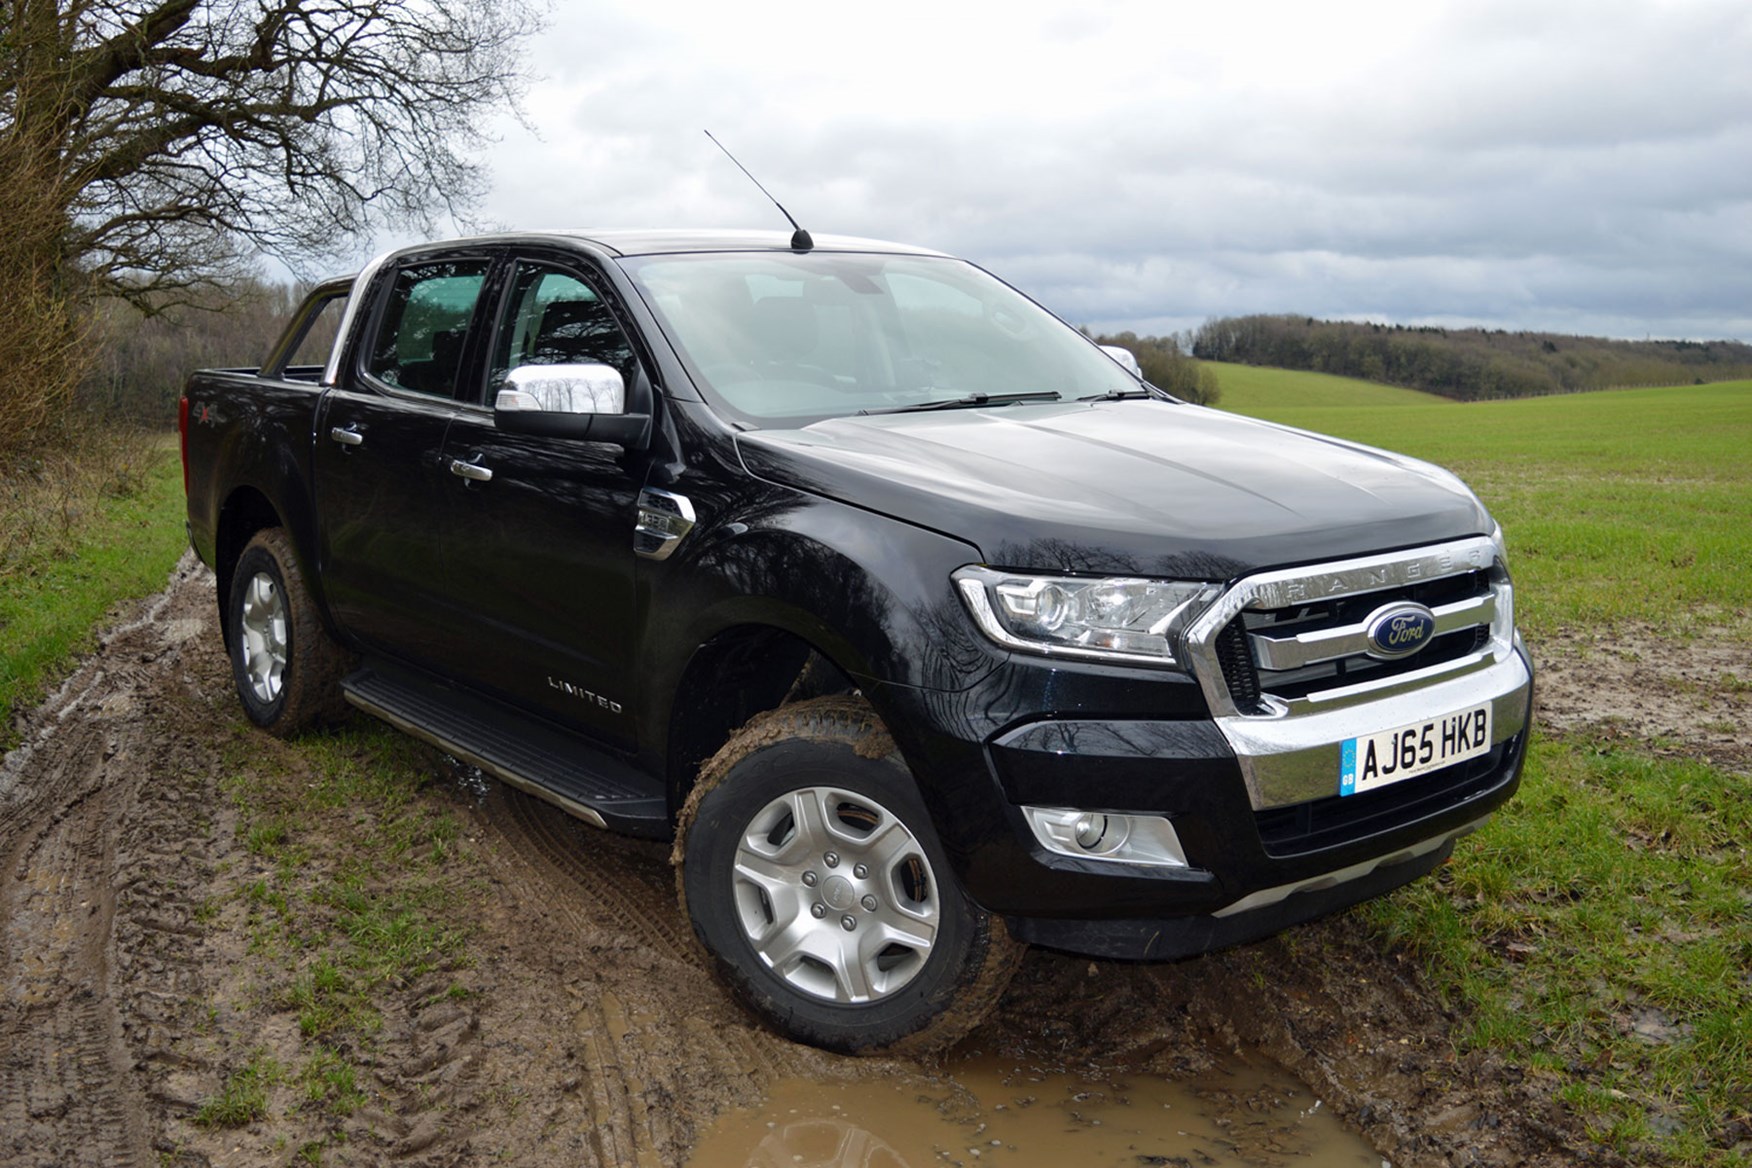 Ford Ranger Limited 3.2 Euro 5 review - front view, black, on mud